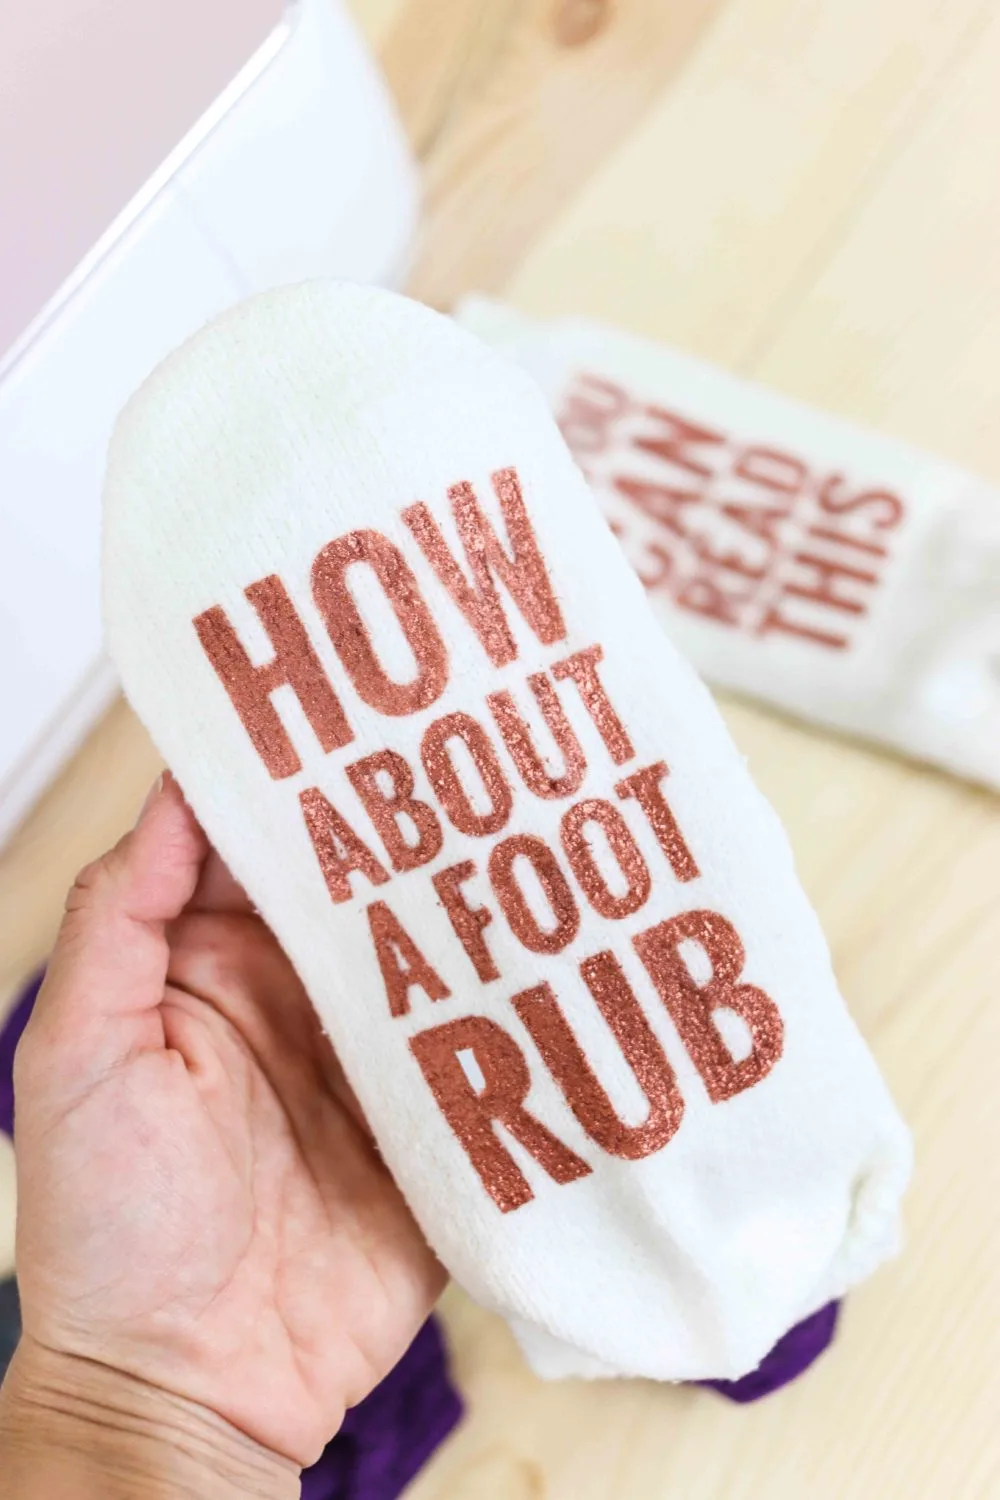 Socks made with metallic fabric paint made with freezer paper and cricut